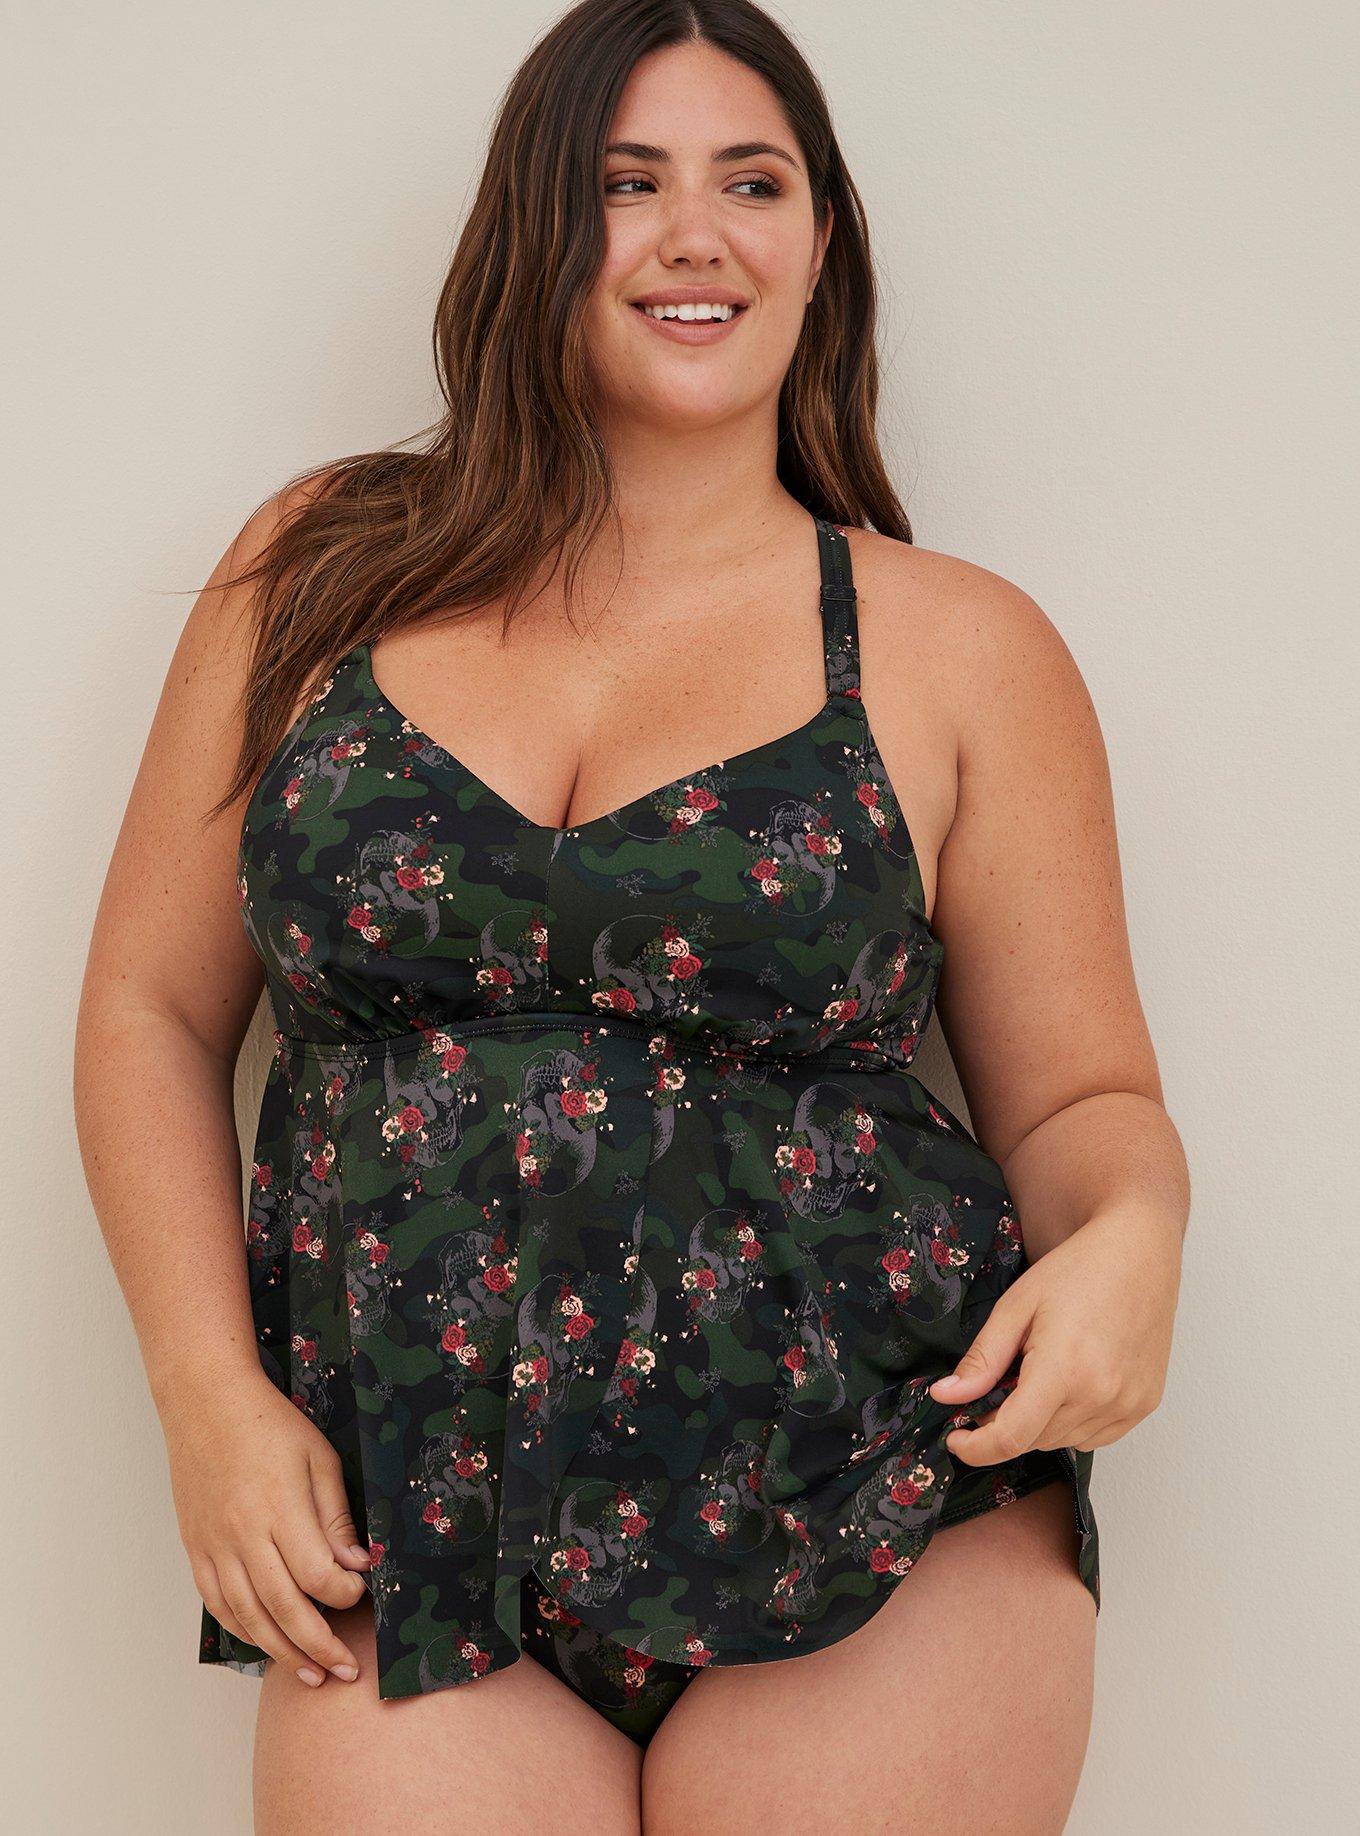 I'm 280 lbs & size XXL with a tummy - I found the perfect bodysuit for  tight sweater dresses, it sucks in my whole body